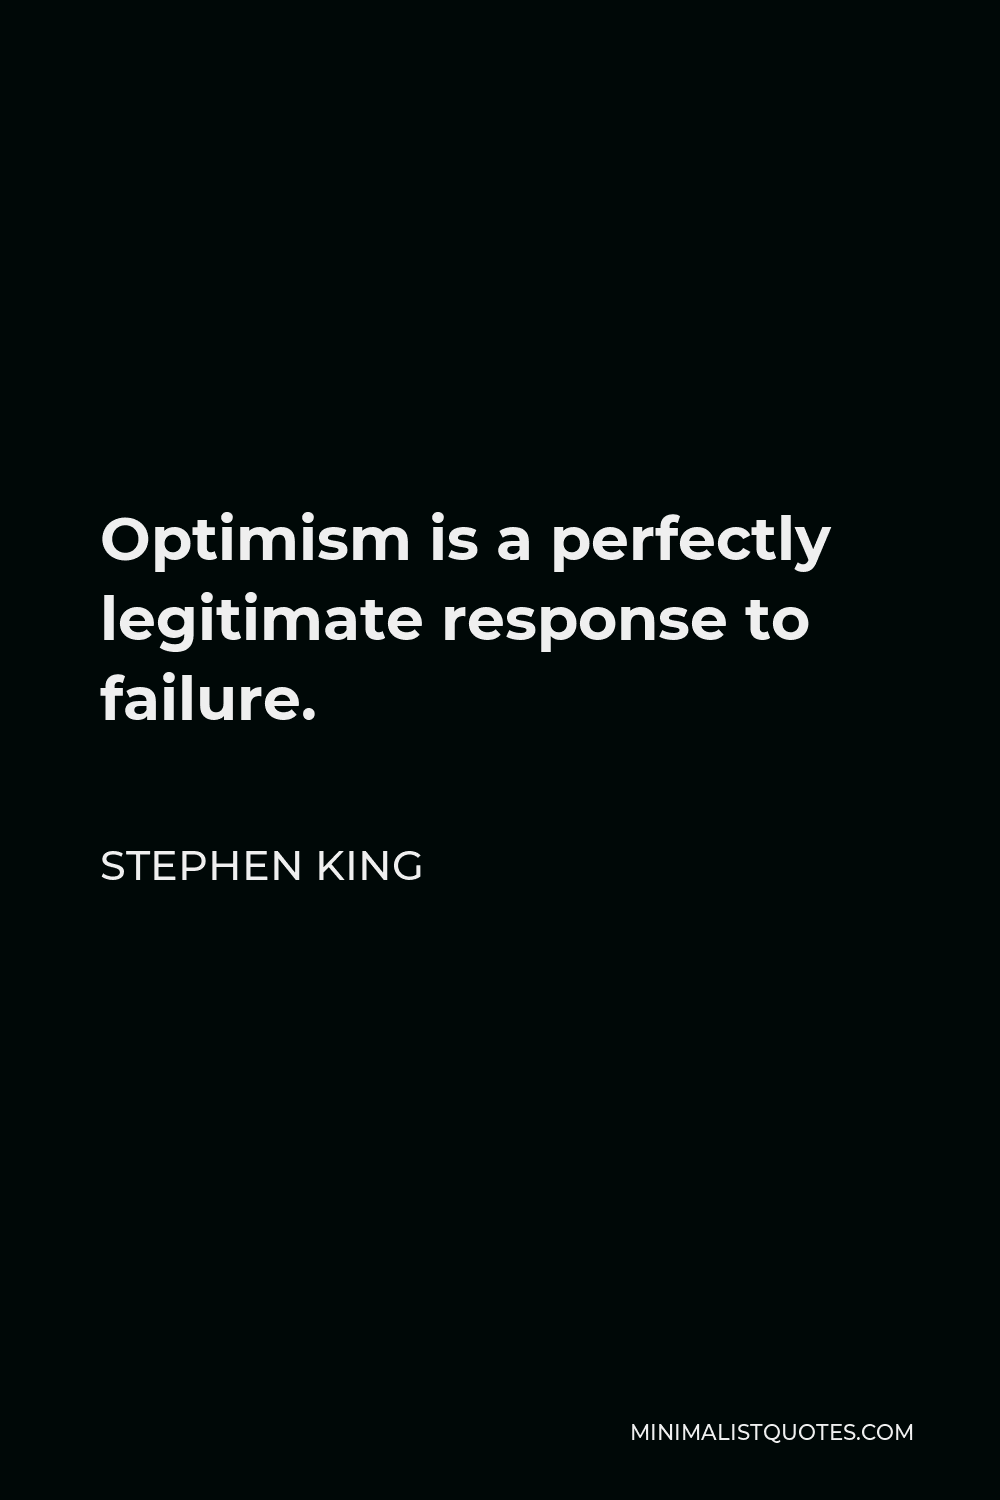 Stephen King Quote - Optimism is a perfectly legitimate response to failure.